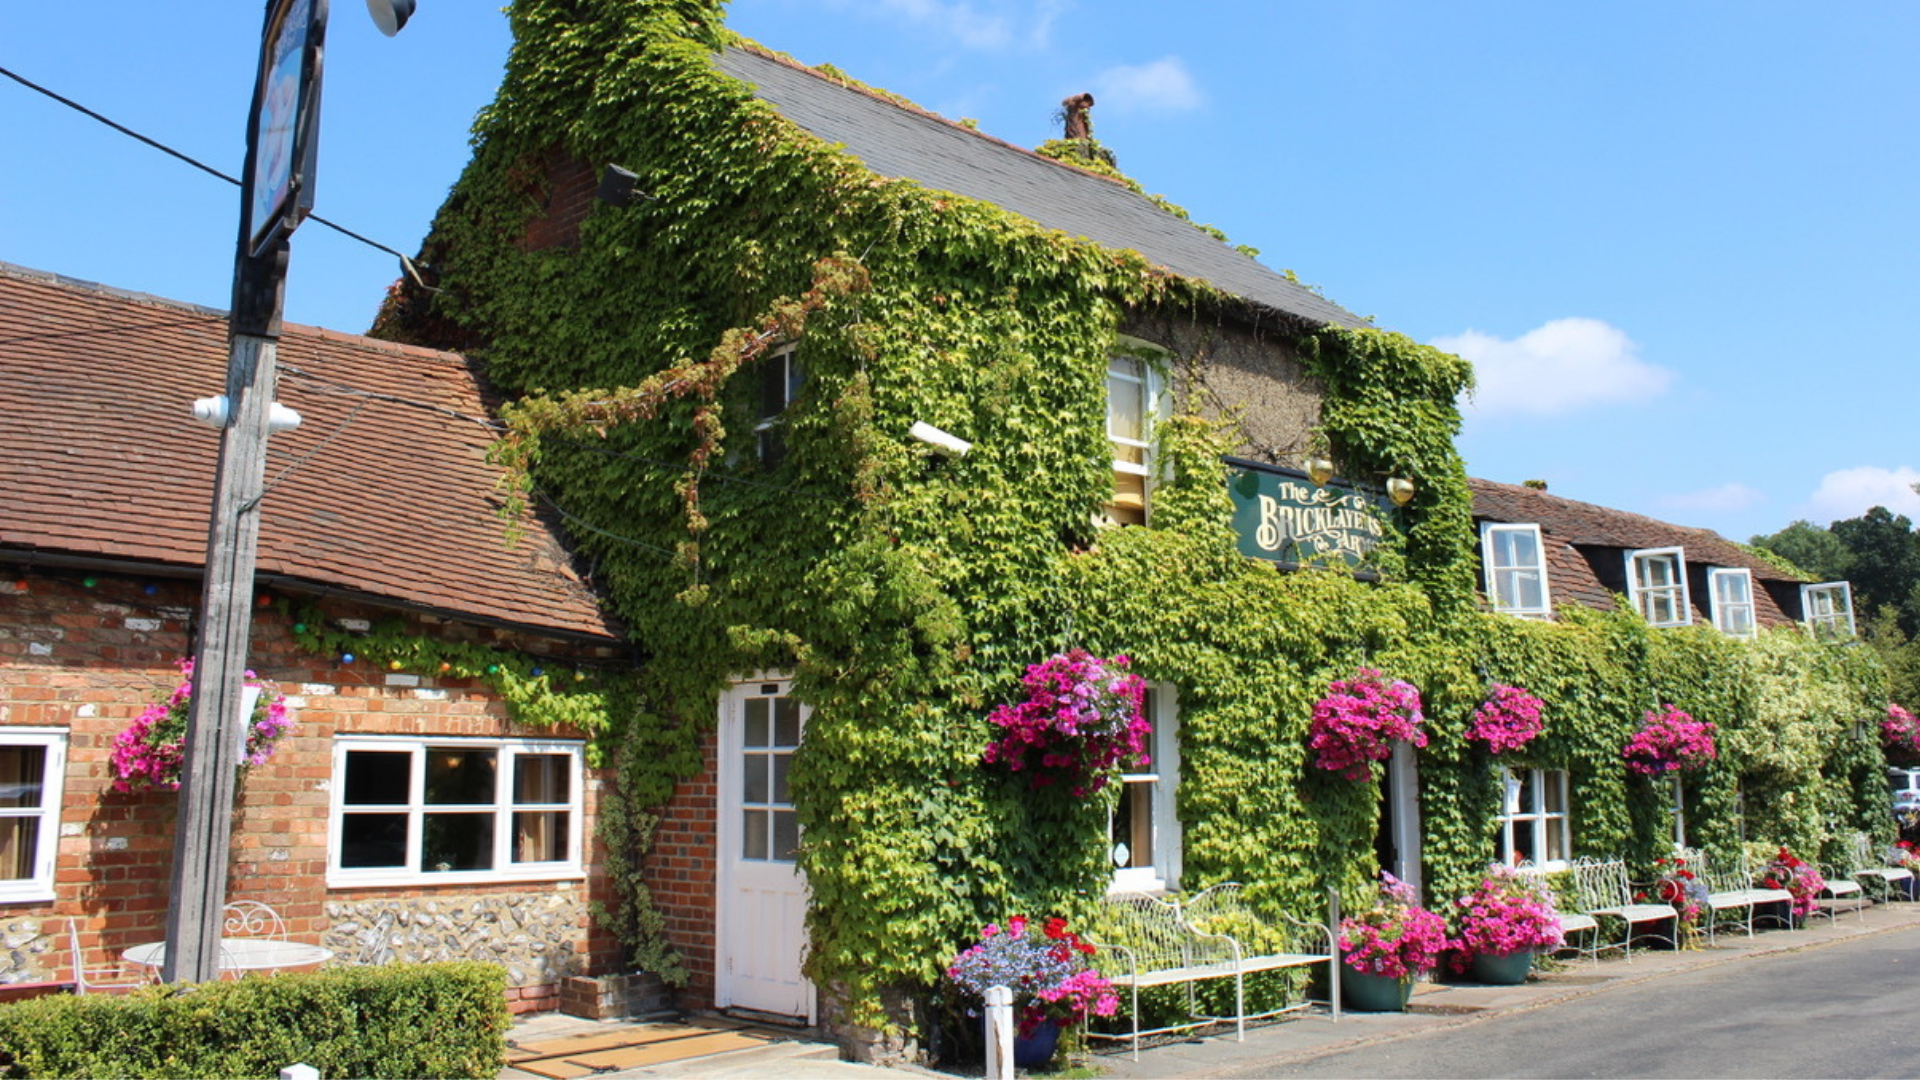 Photo of The Bricklayers Arms, Flaunden